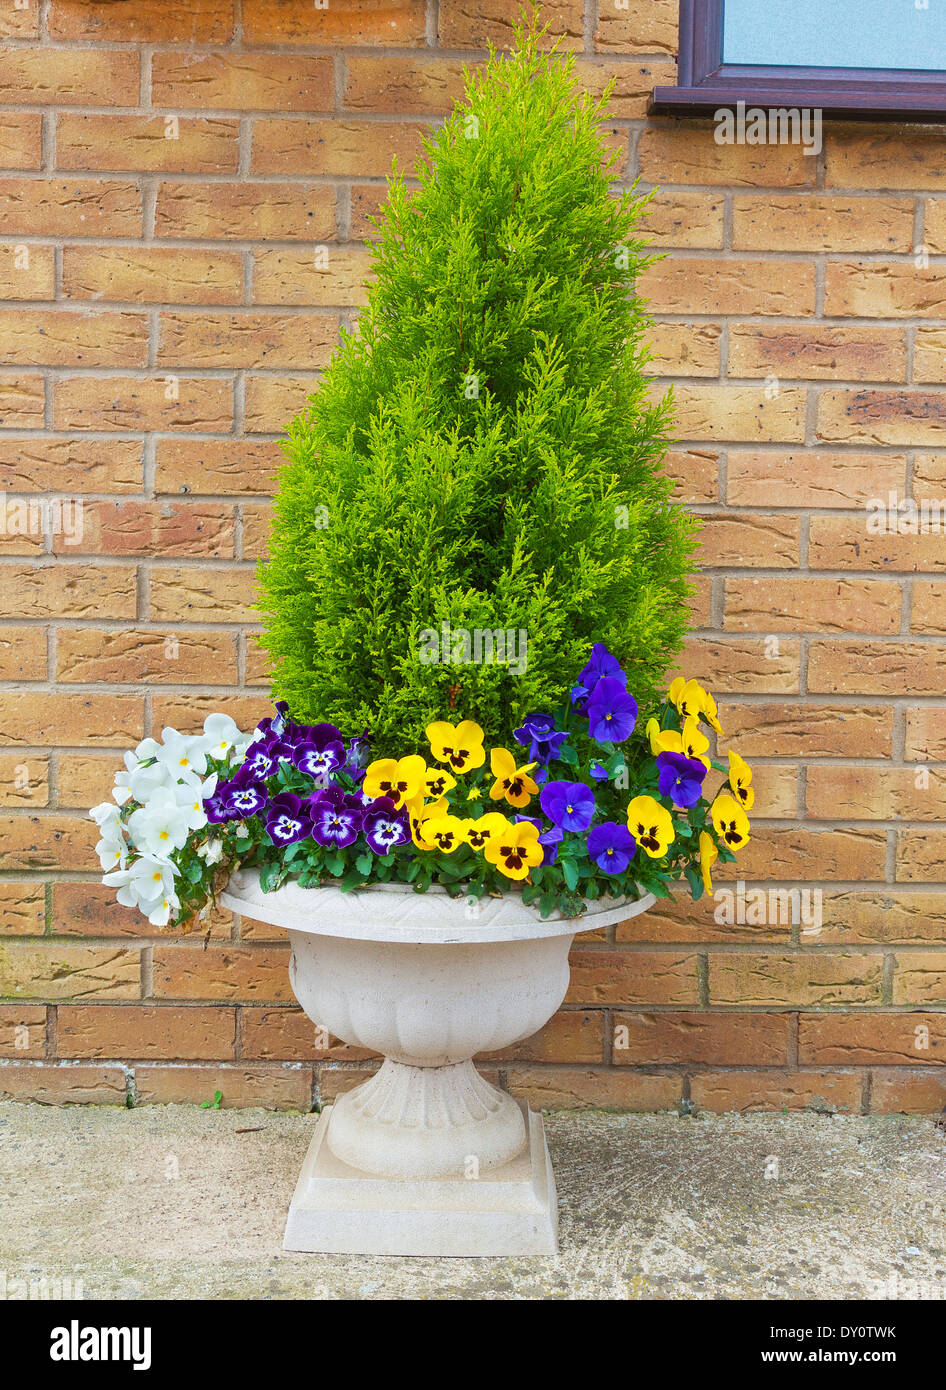 Winter and spring pansies and evergreen shrub in container Stock Photo